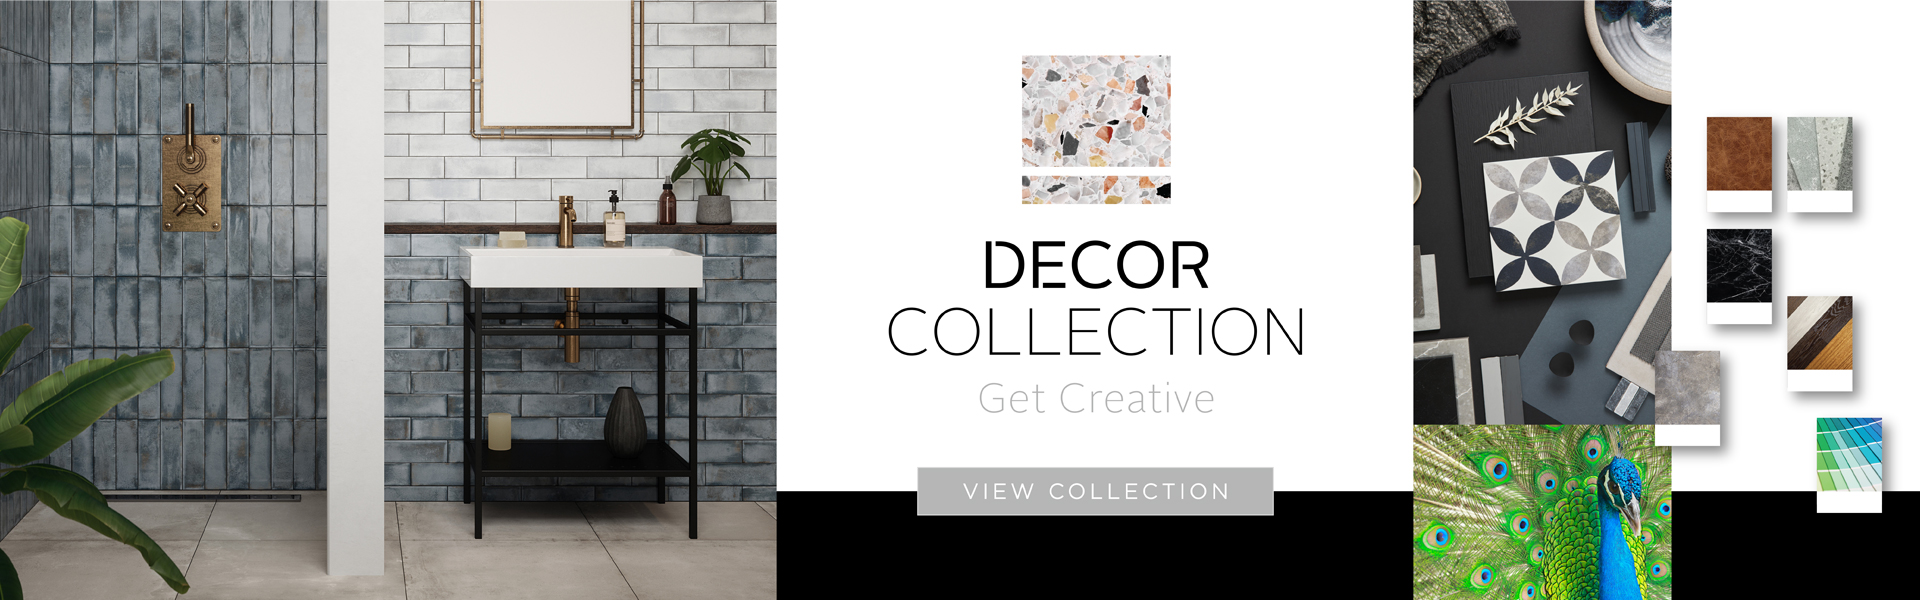 Decor Image collections